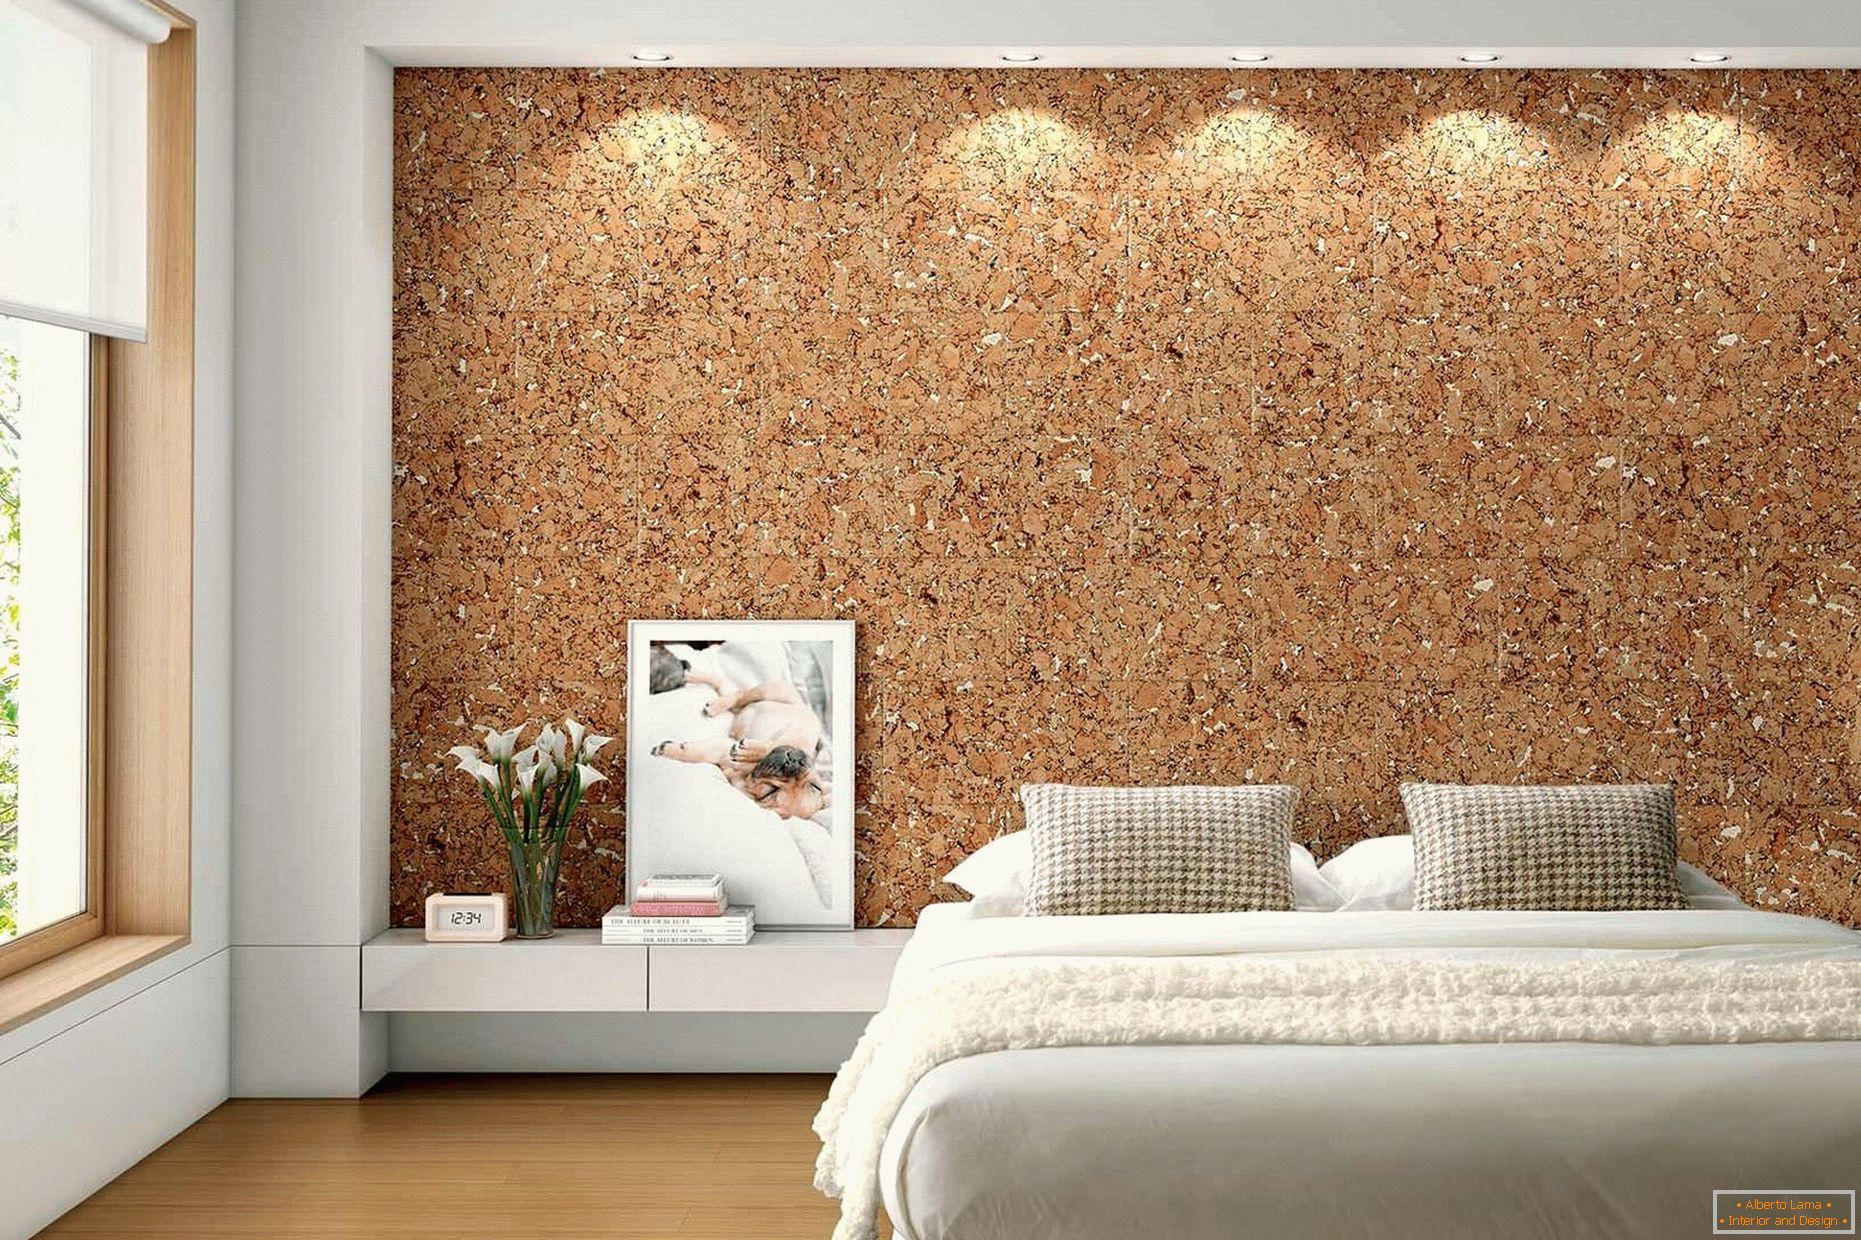 Making the head of the bed with cork wallpaper